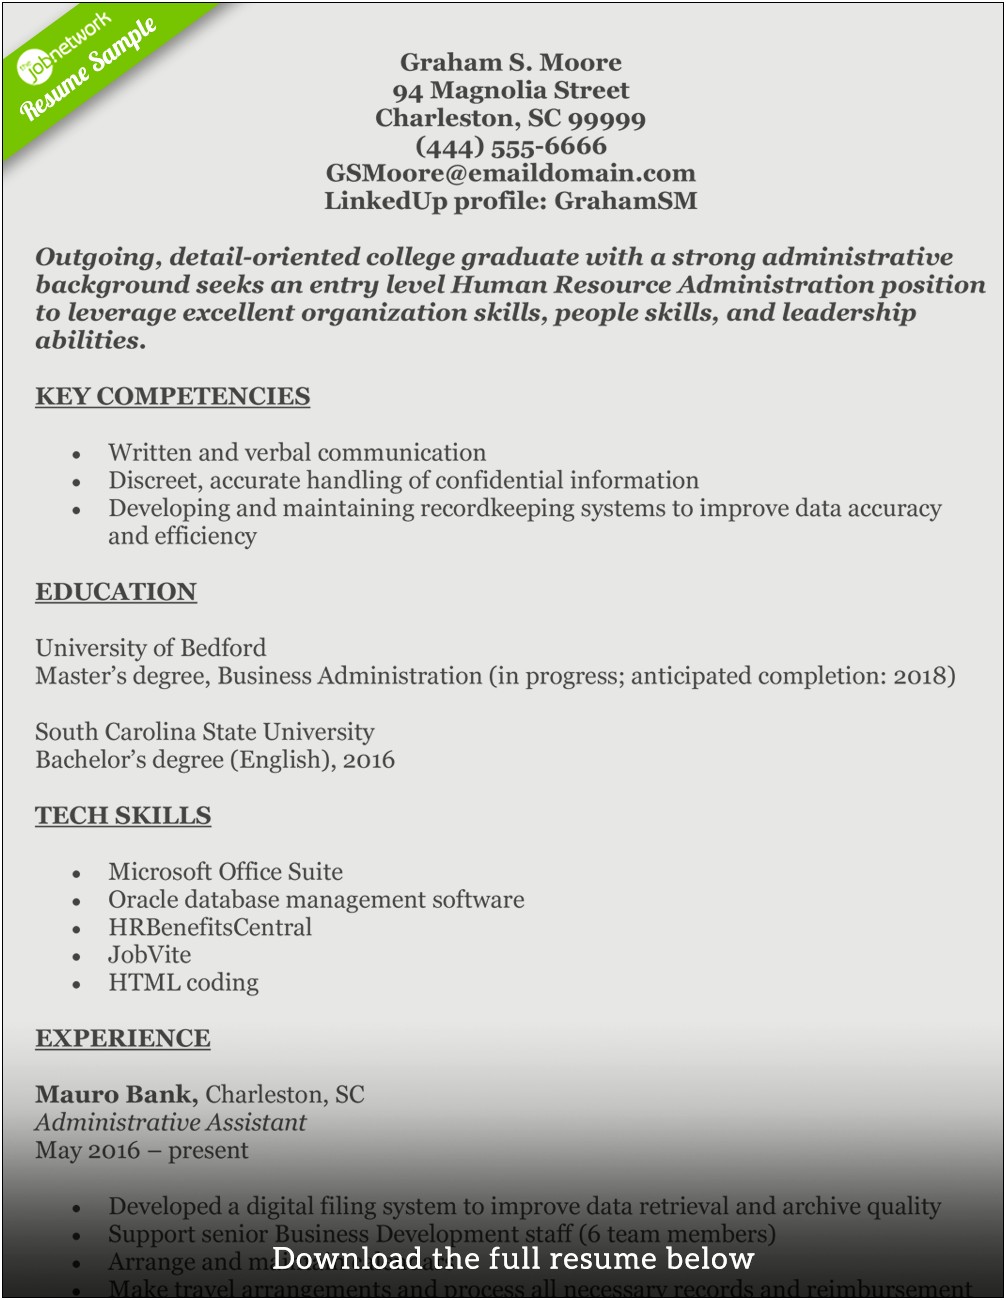 Resume Profile Samples For Human Resources